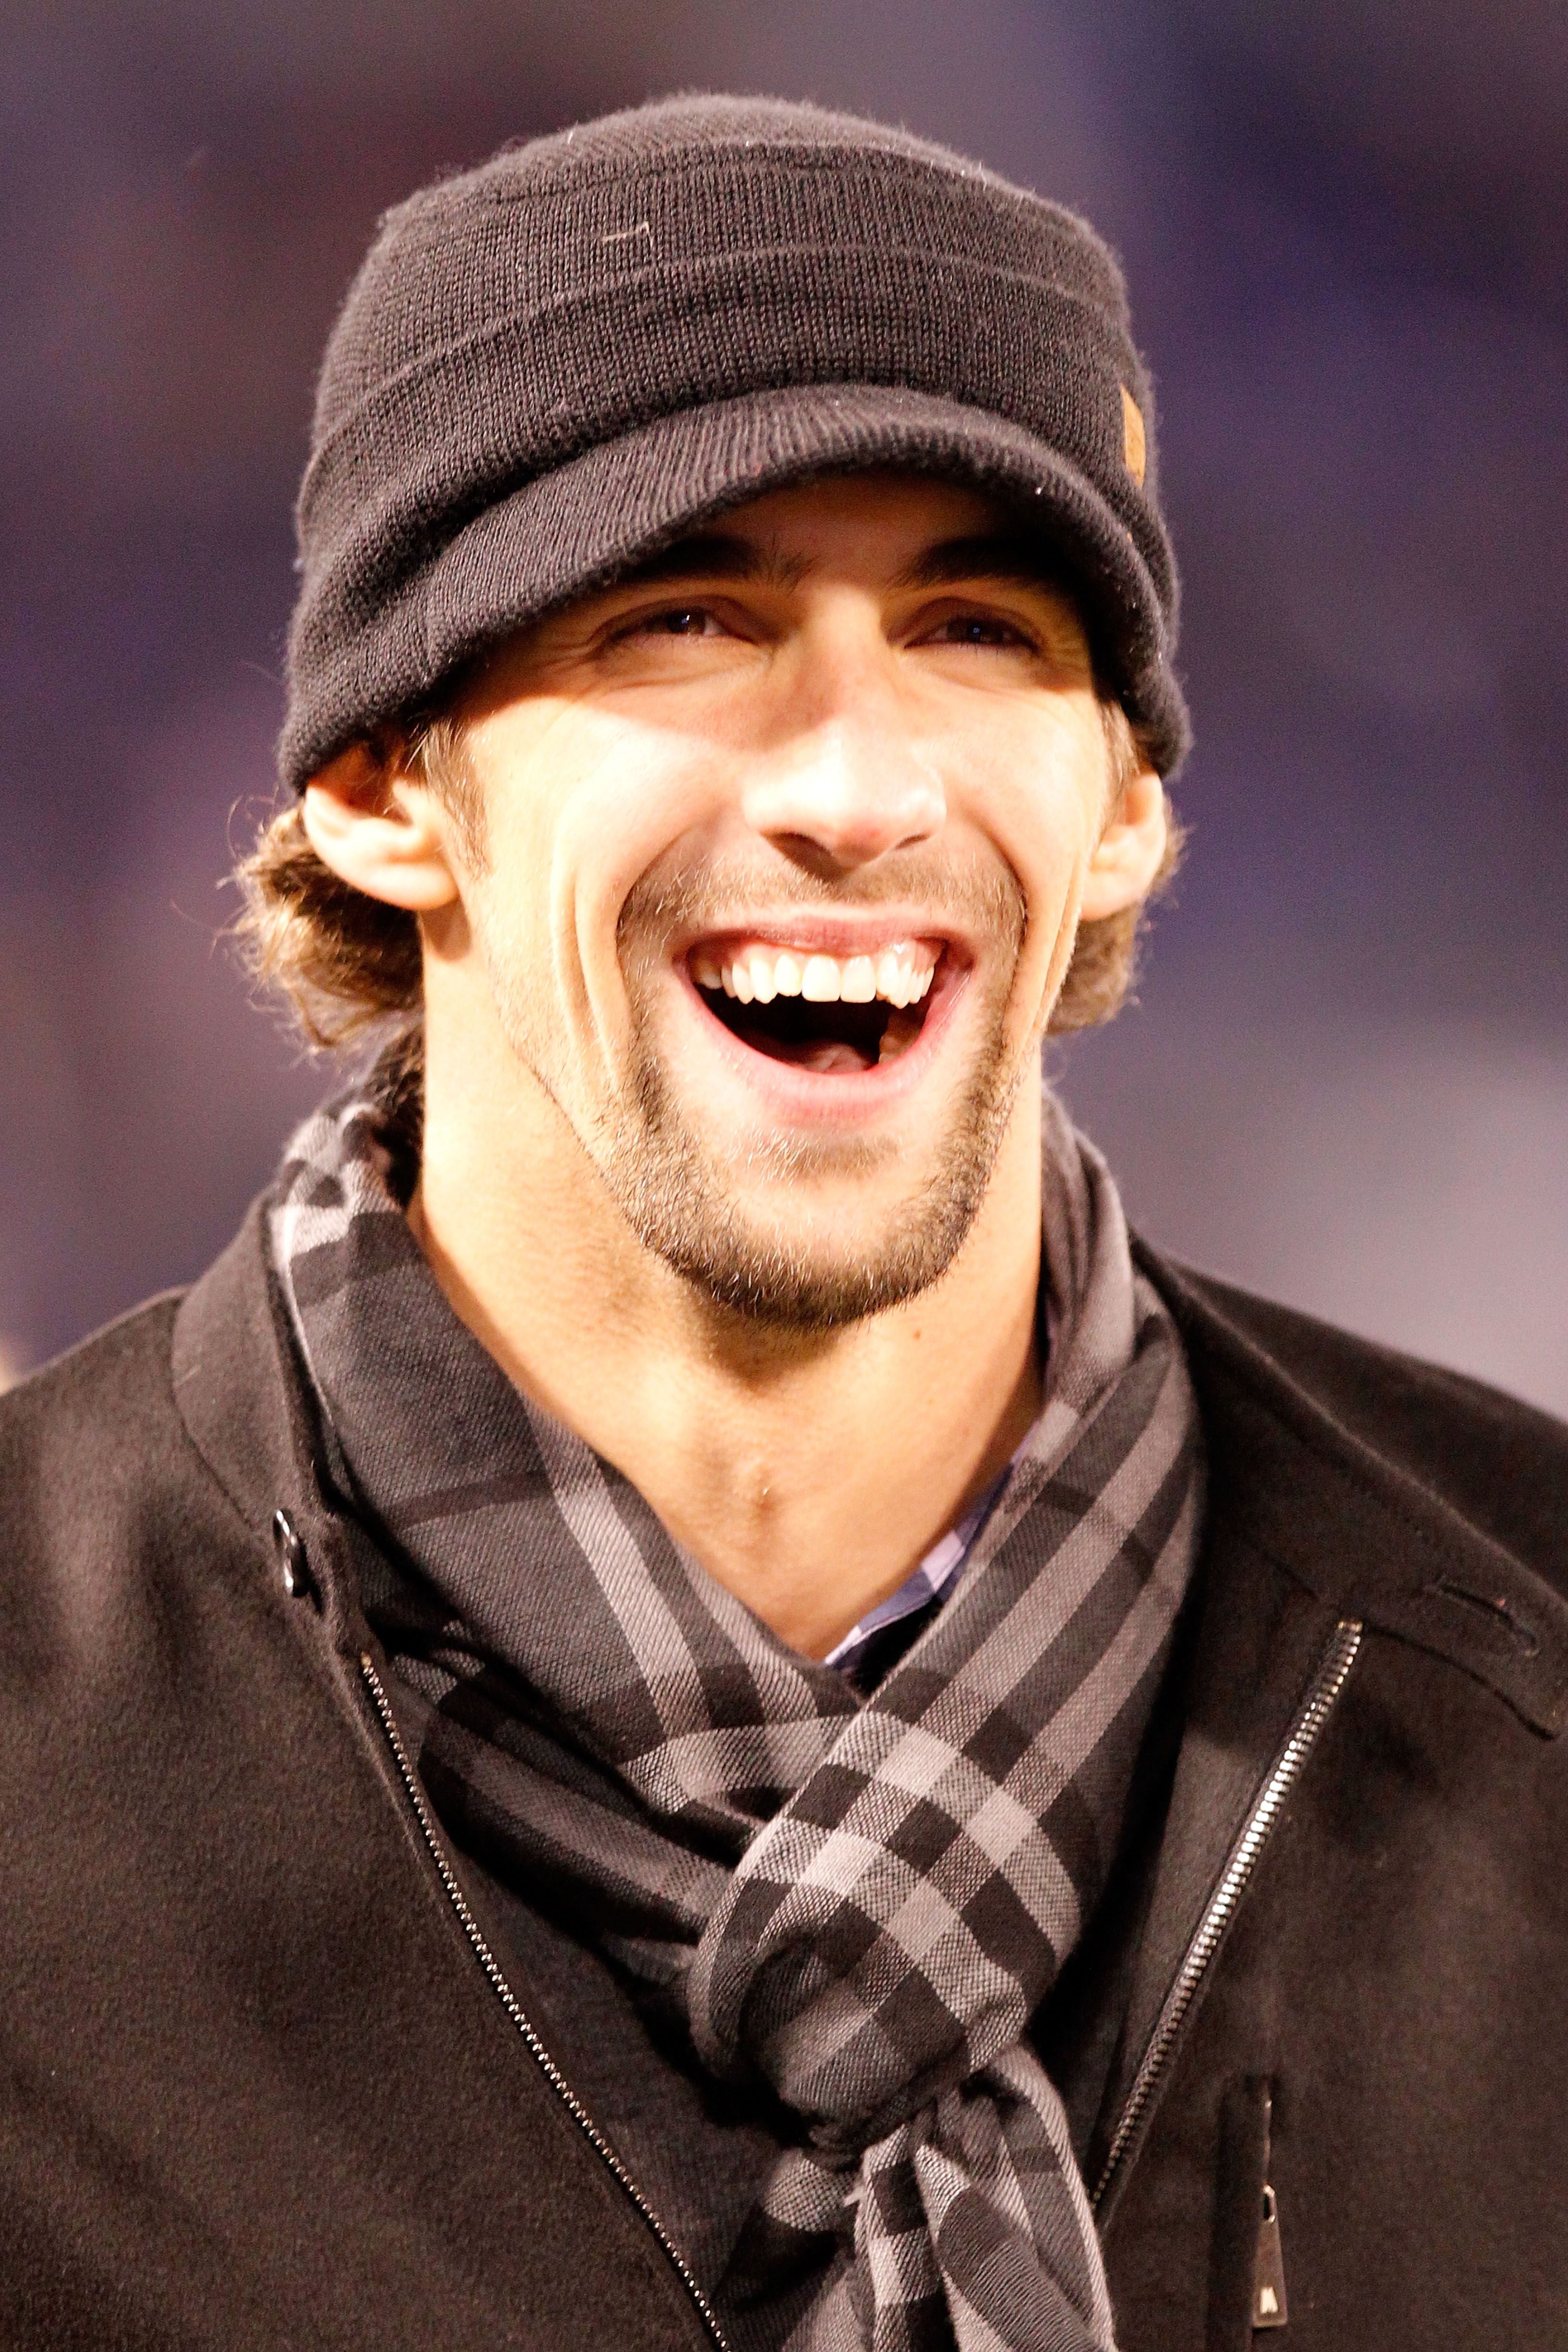 BALTIMORE, MD - DECEMBER 05:  American swimmer Michael Phelps smiles as he watches the Baltimore Ravens and the Pittsburgh Steelers during the first quarter of the game at M&T Bank Stadium on December 5, 2010 in Baltimore, Maryland.  (Photo by Geoff Burke